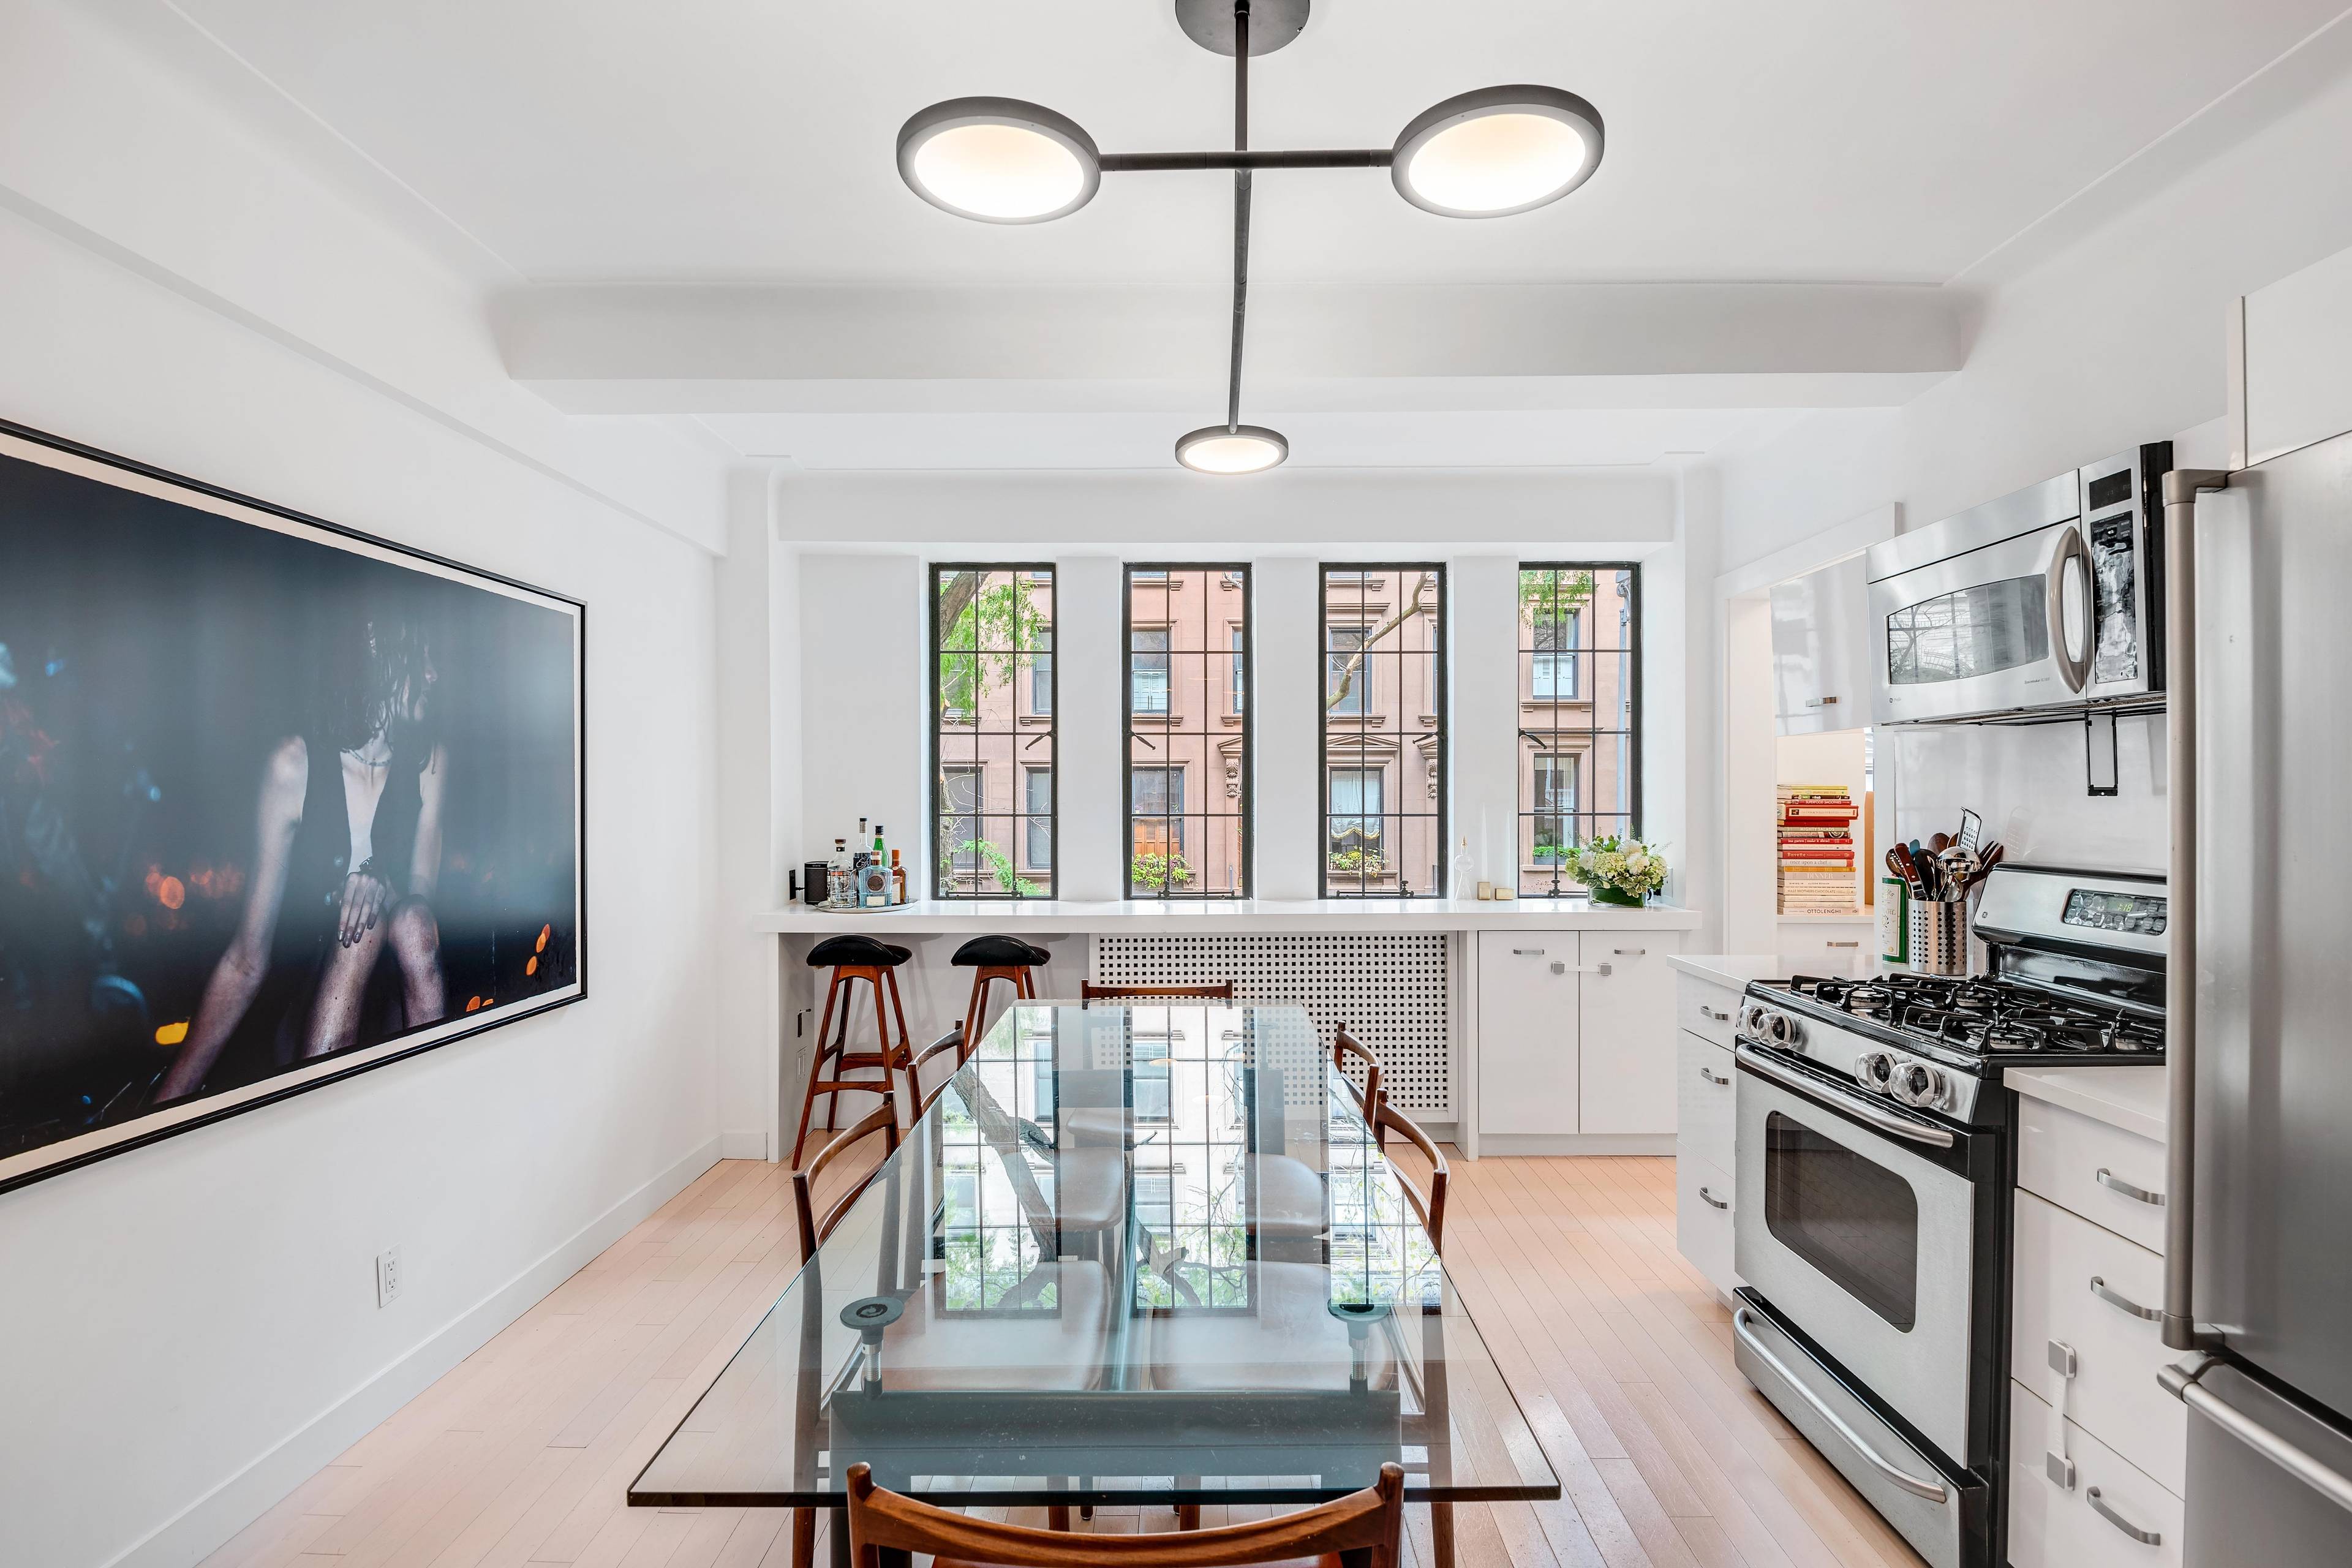 On one of the most desirable blocks in historic Brooklyn Heights, sits this spacious two bed, two full bathroom home.